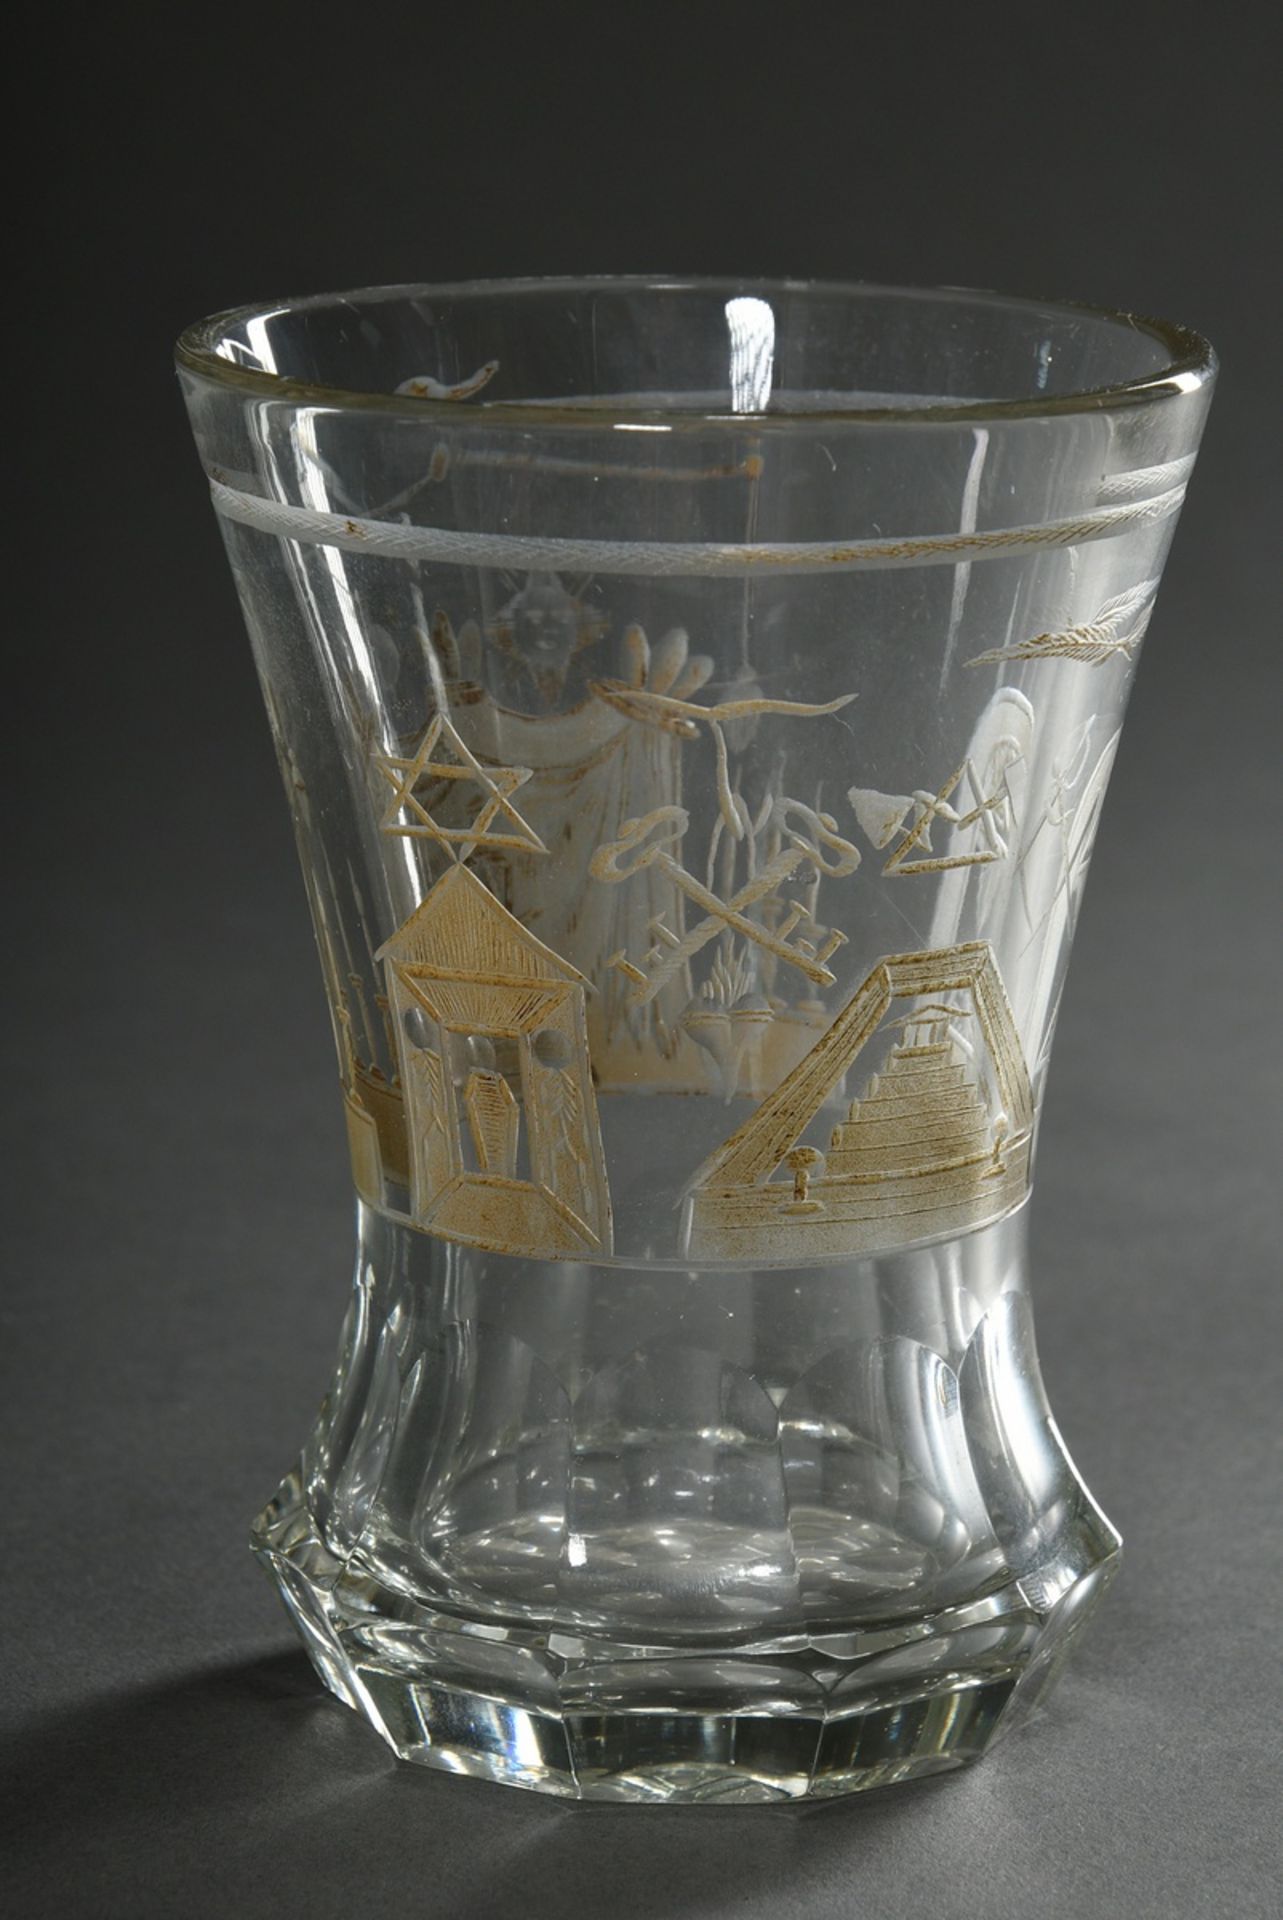 Freemason pedestal pot with rich symbol cut and delicate remnants of gilding, laced 11-fold faceted - Image 2 of 4